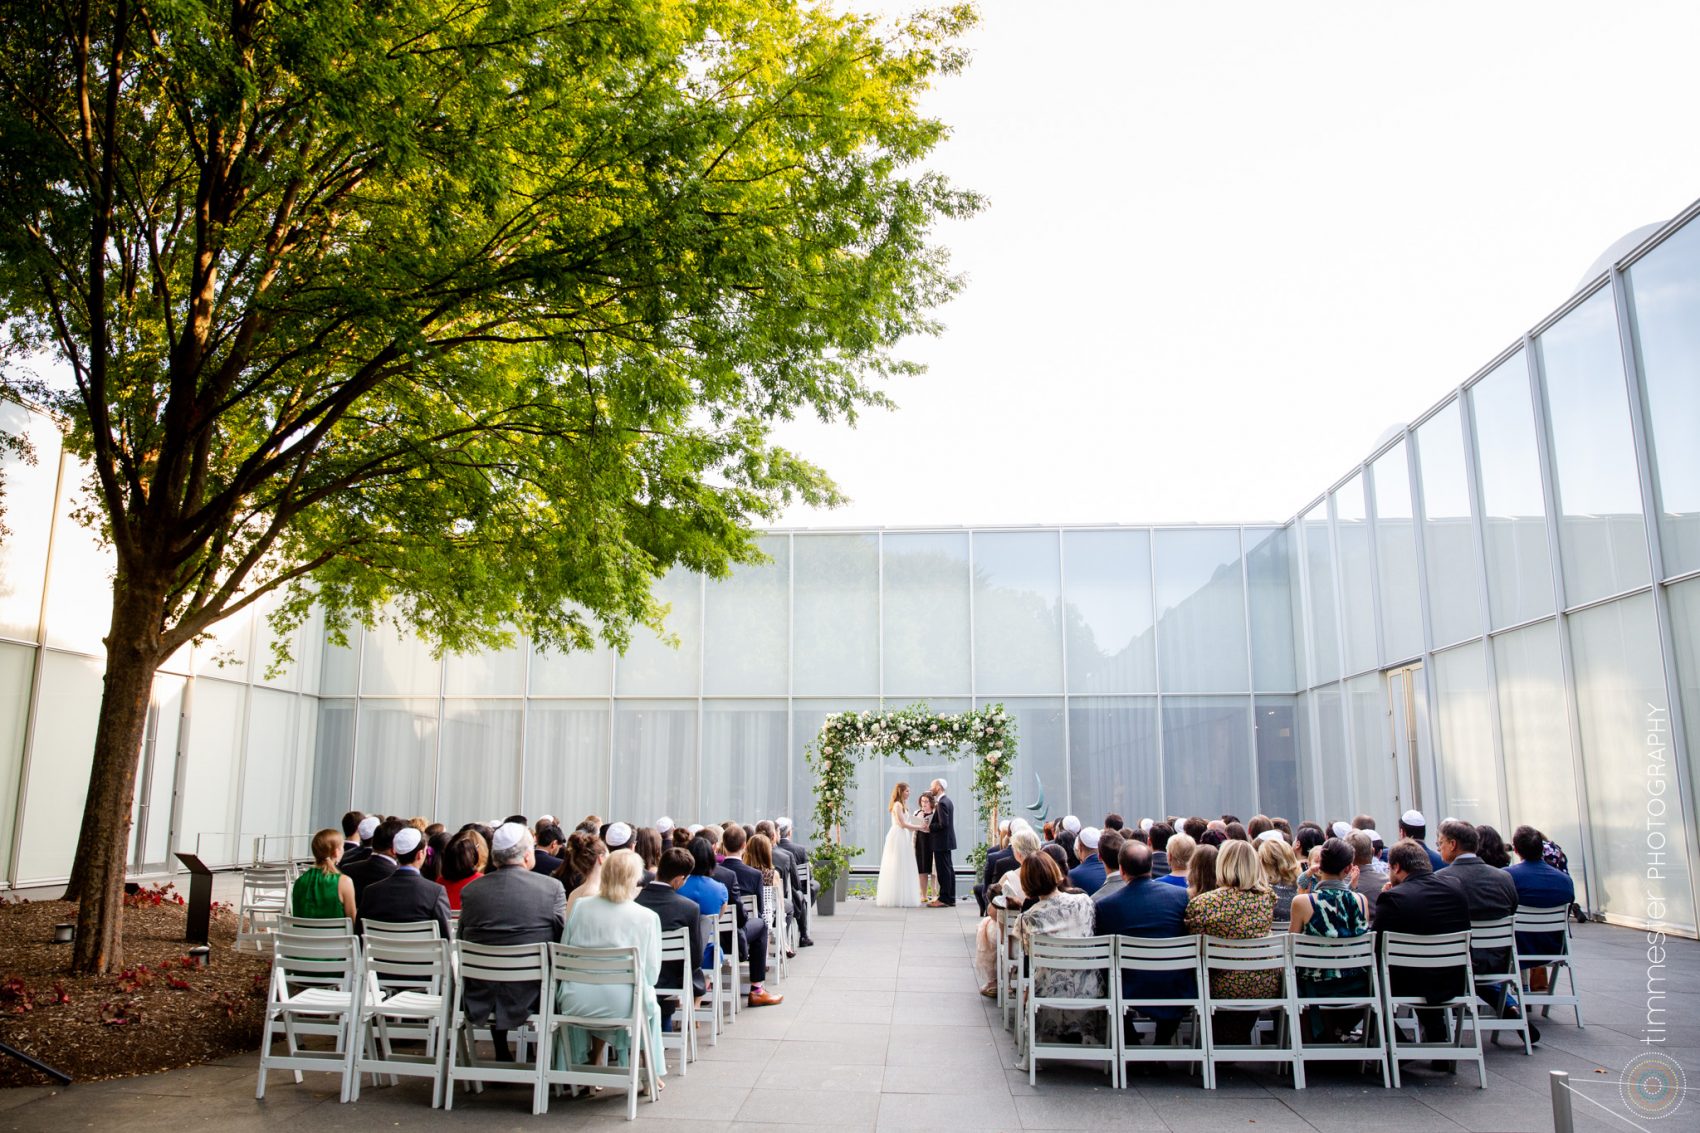 An outdoor, courtyard ceremony at NCMA in Raleigh, North Carolina.